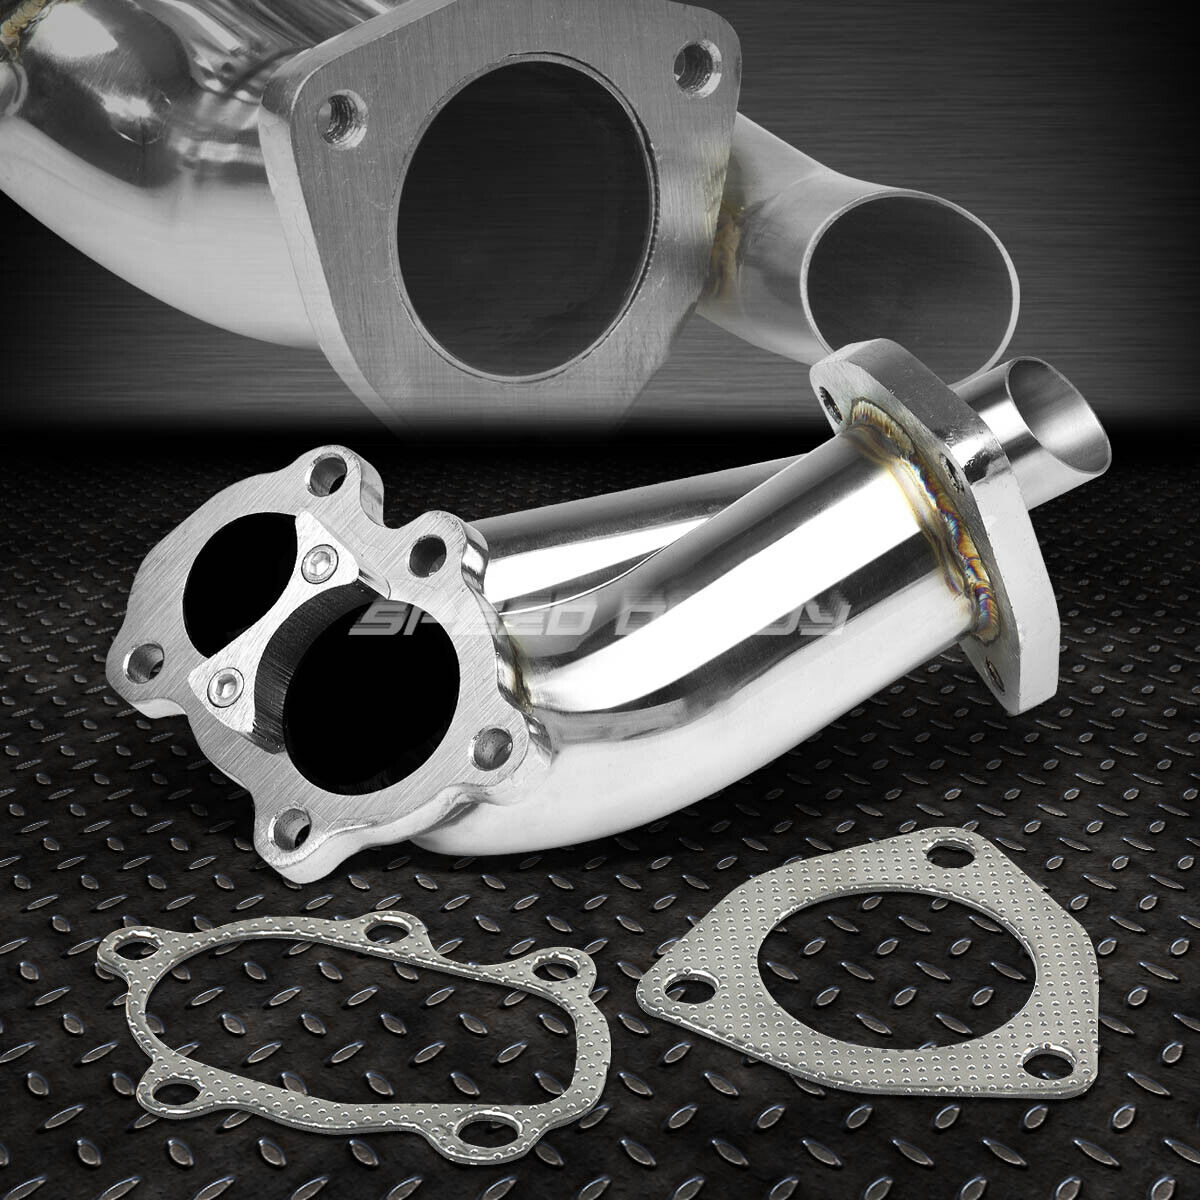 FOR 240SX S13 S14 S15 SR SR20-DET RACING TURBO DOWNPIPE ELBOW+DUMP PIPE EXHAUST